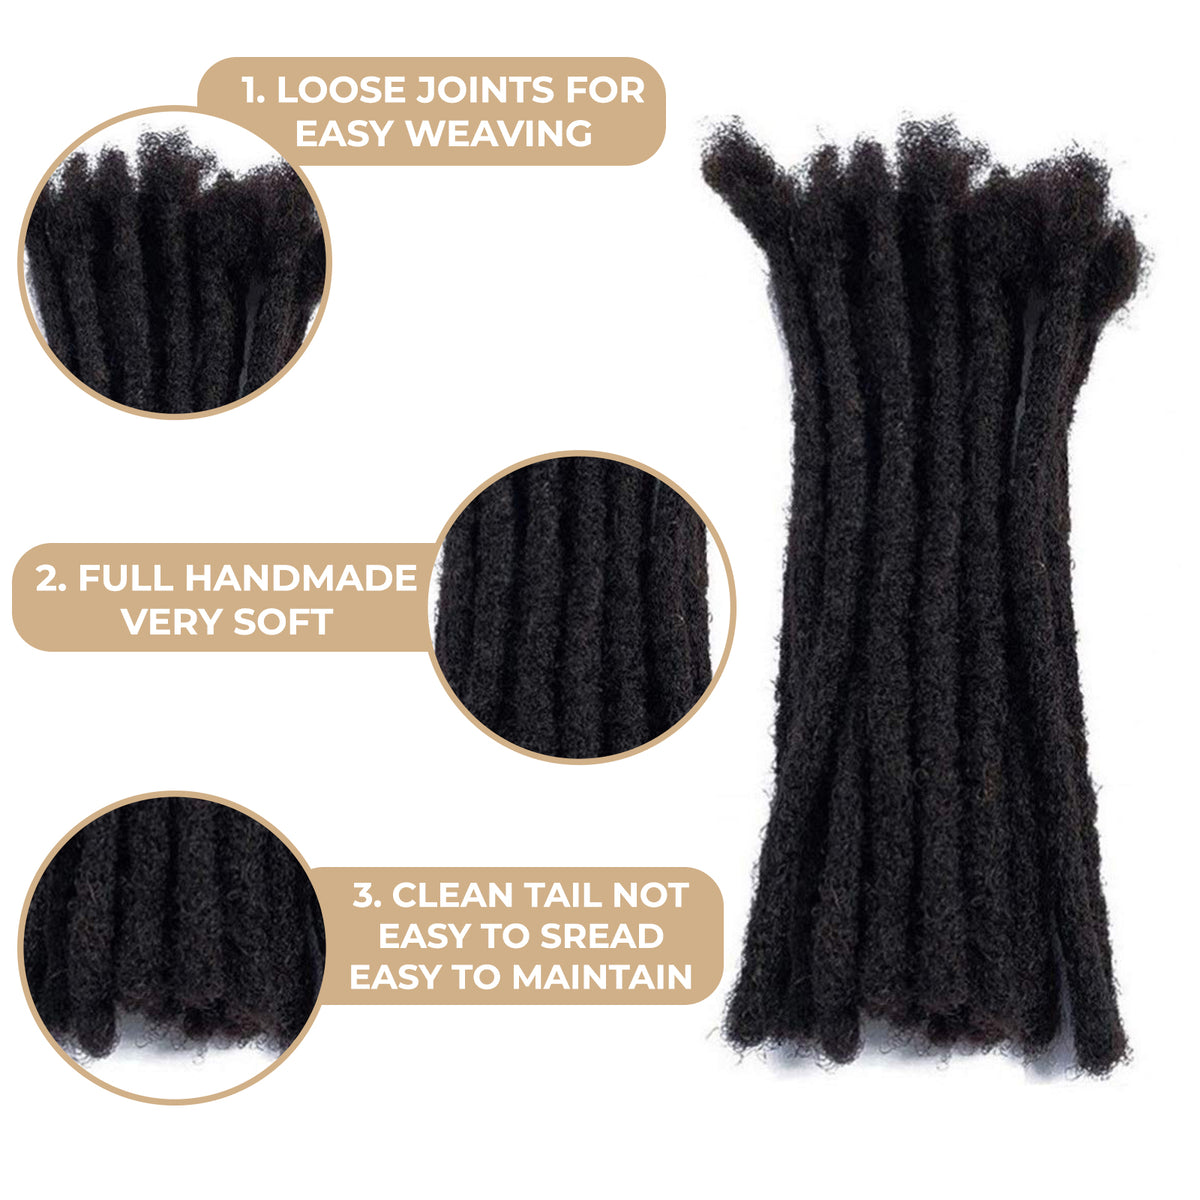 100% Human Hair Dreadlock Extensions 8 Inch 5 Strands Handmade Natural Loc Extensions Human Hair Bundle Dreads Extensions For Woman & Men Can Be Dyed/Bleached  (8 Inch 5 Strands, 0.8cm Natural Black)